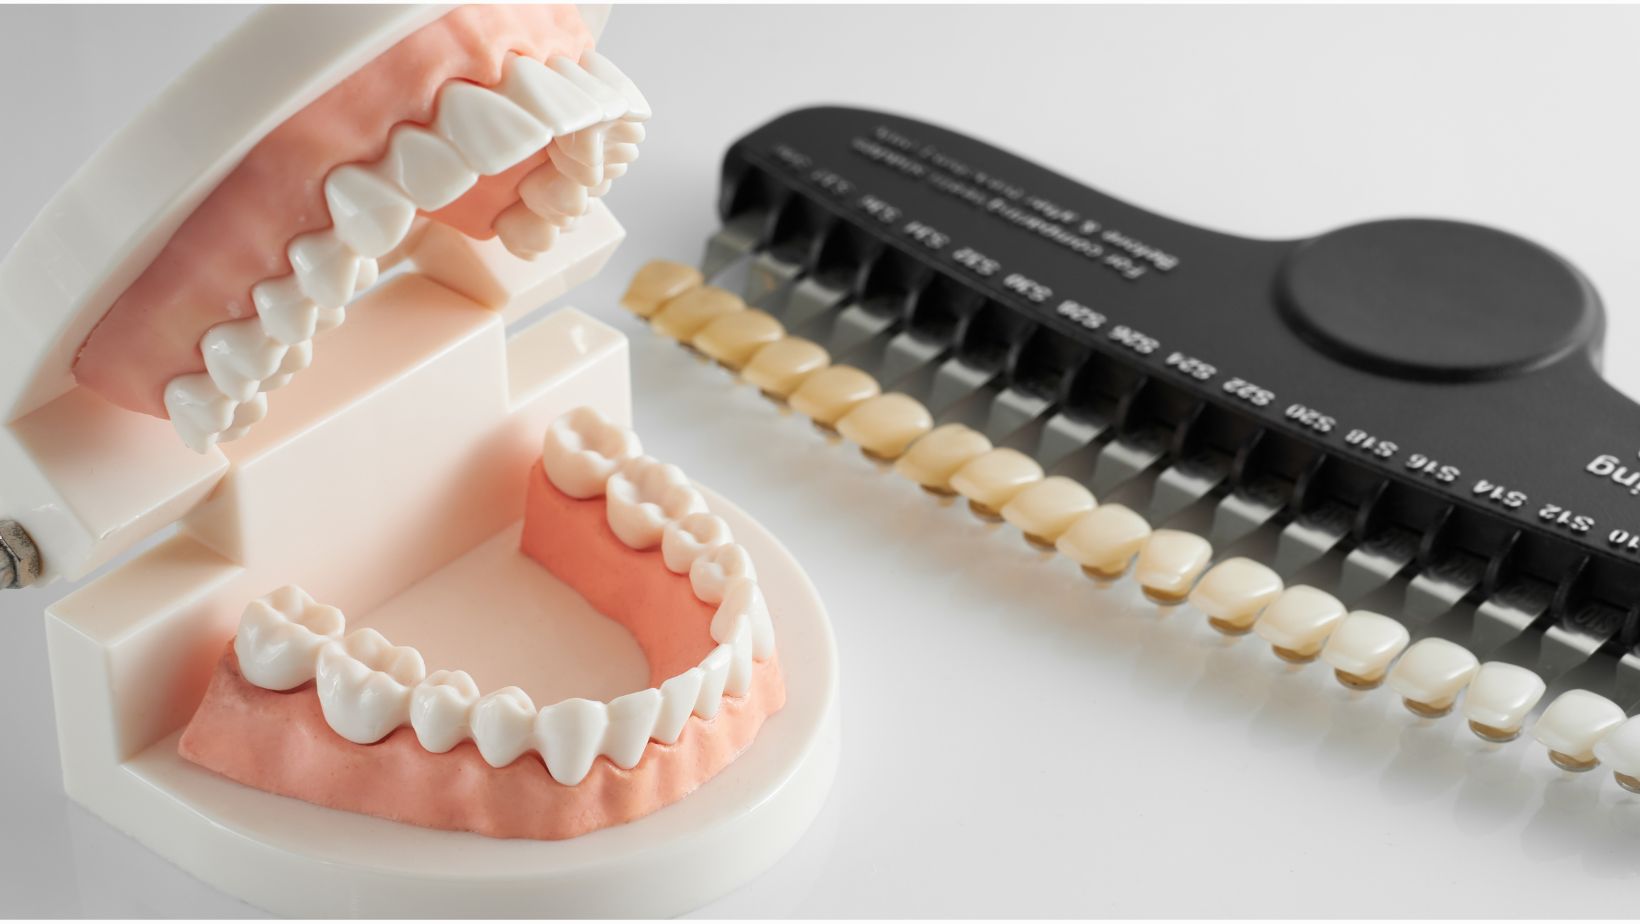 7 Things To Avoid When Choosing The Right Private Label Teeth Whitening Manufacturers